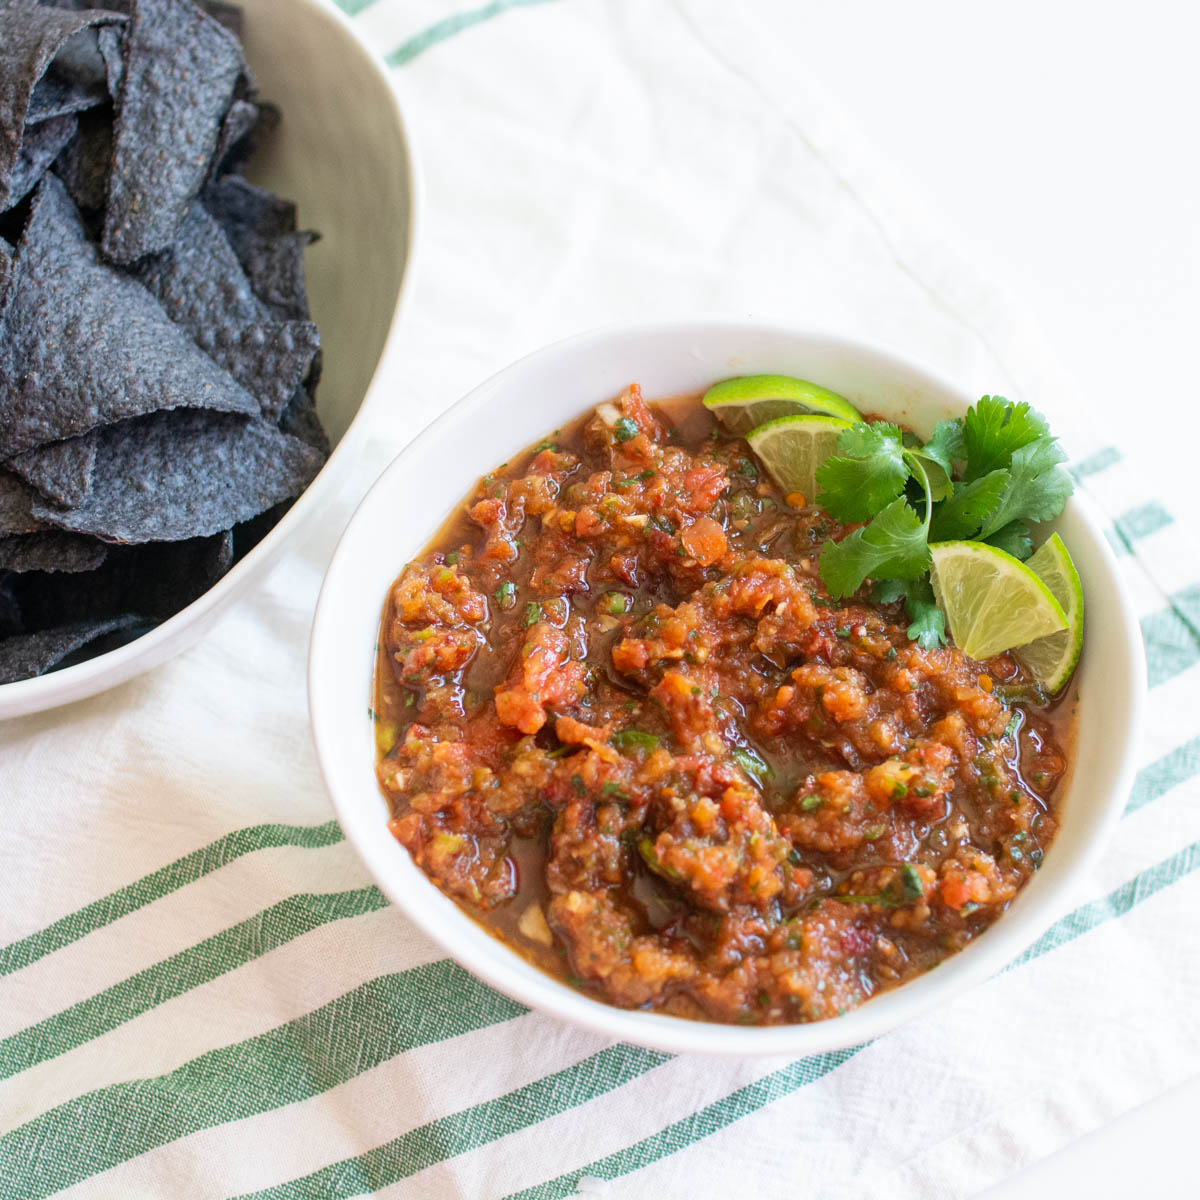 Mike's Chipotle Salsa 